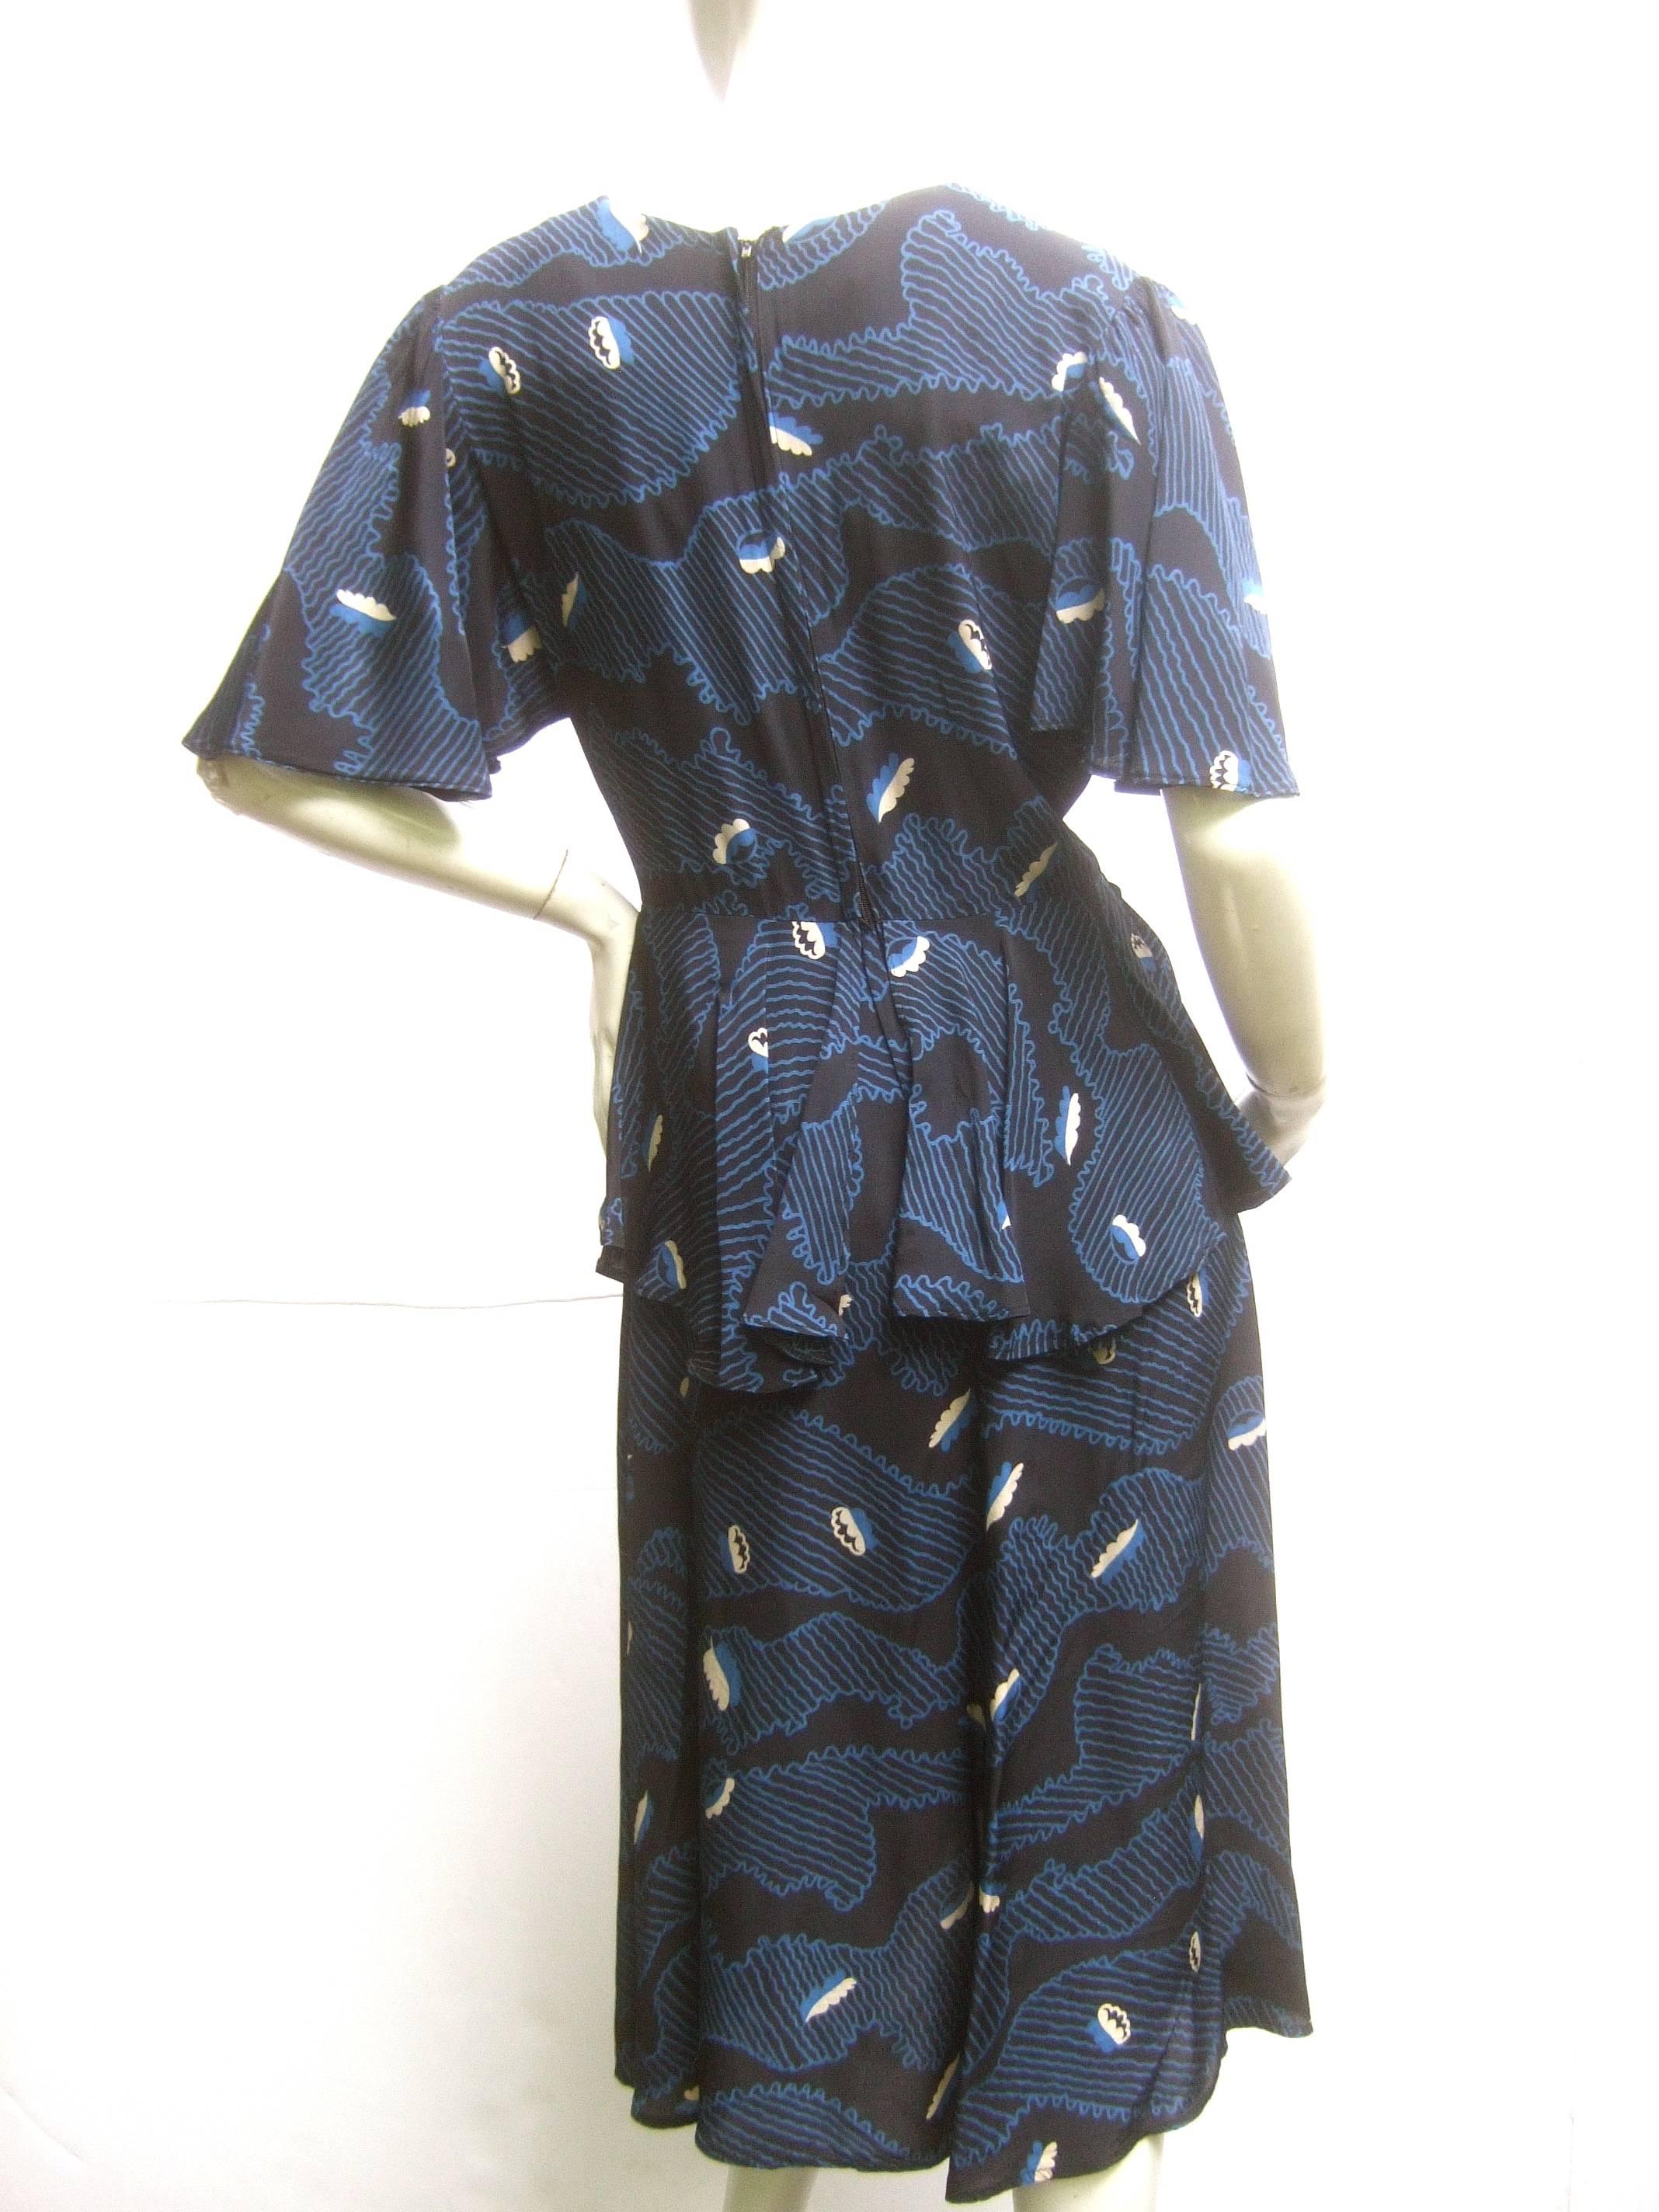 Ossie Clark Moss Crepe Dress with Celia Birtwell Fabric. Early 1970's. 3